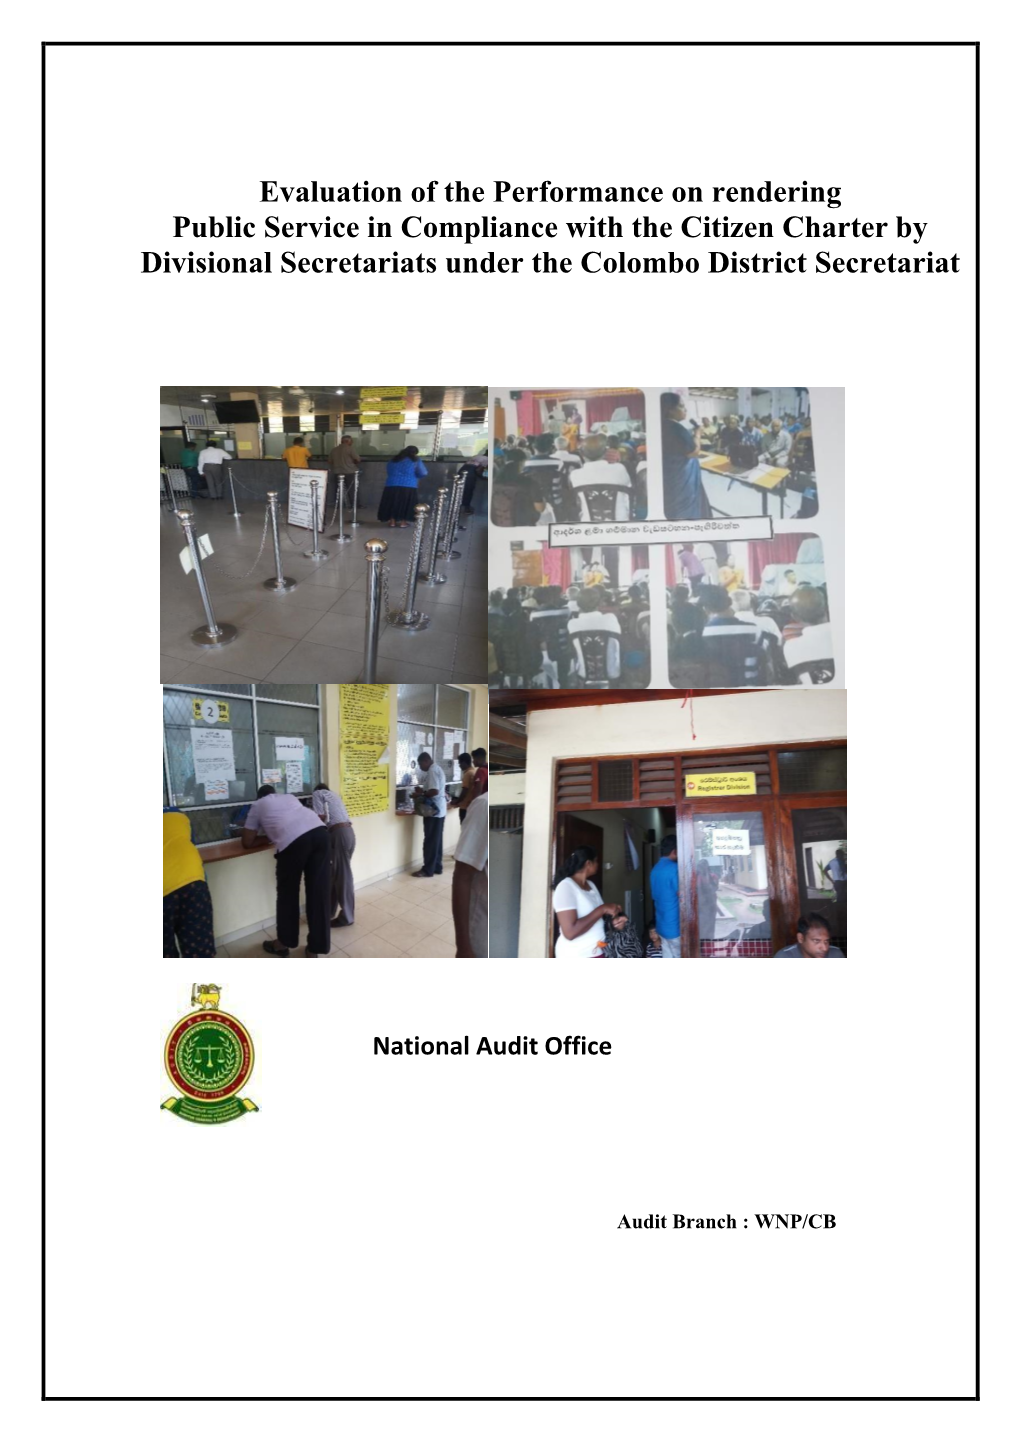 Evaluation of the Performance on Rendering Public Service in Compliance with the Citizen Charter by Divisional Secretariats Under the Colombo District Secretariat